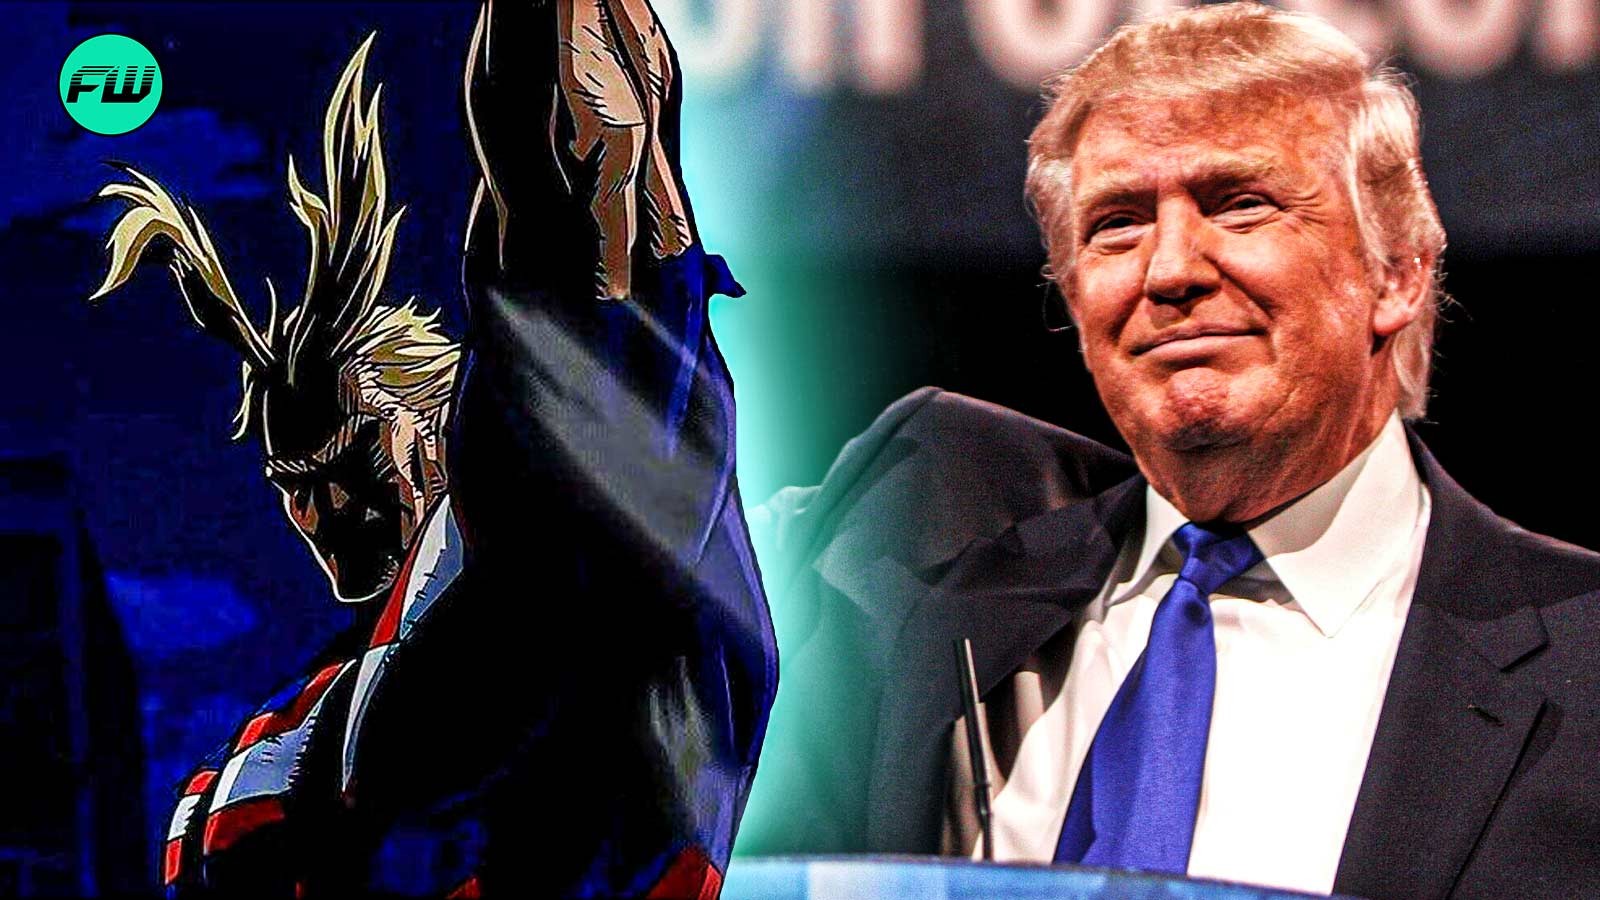 All Might and Donald Trump